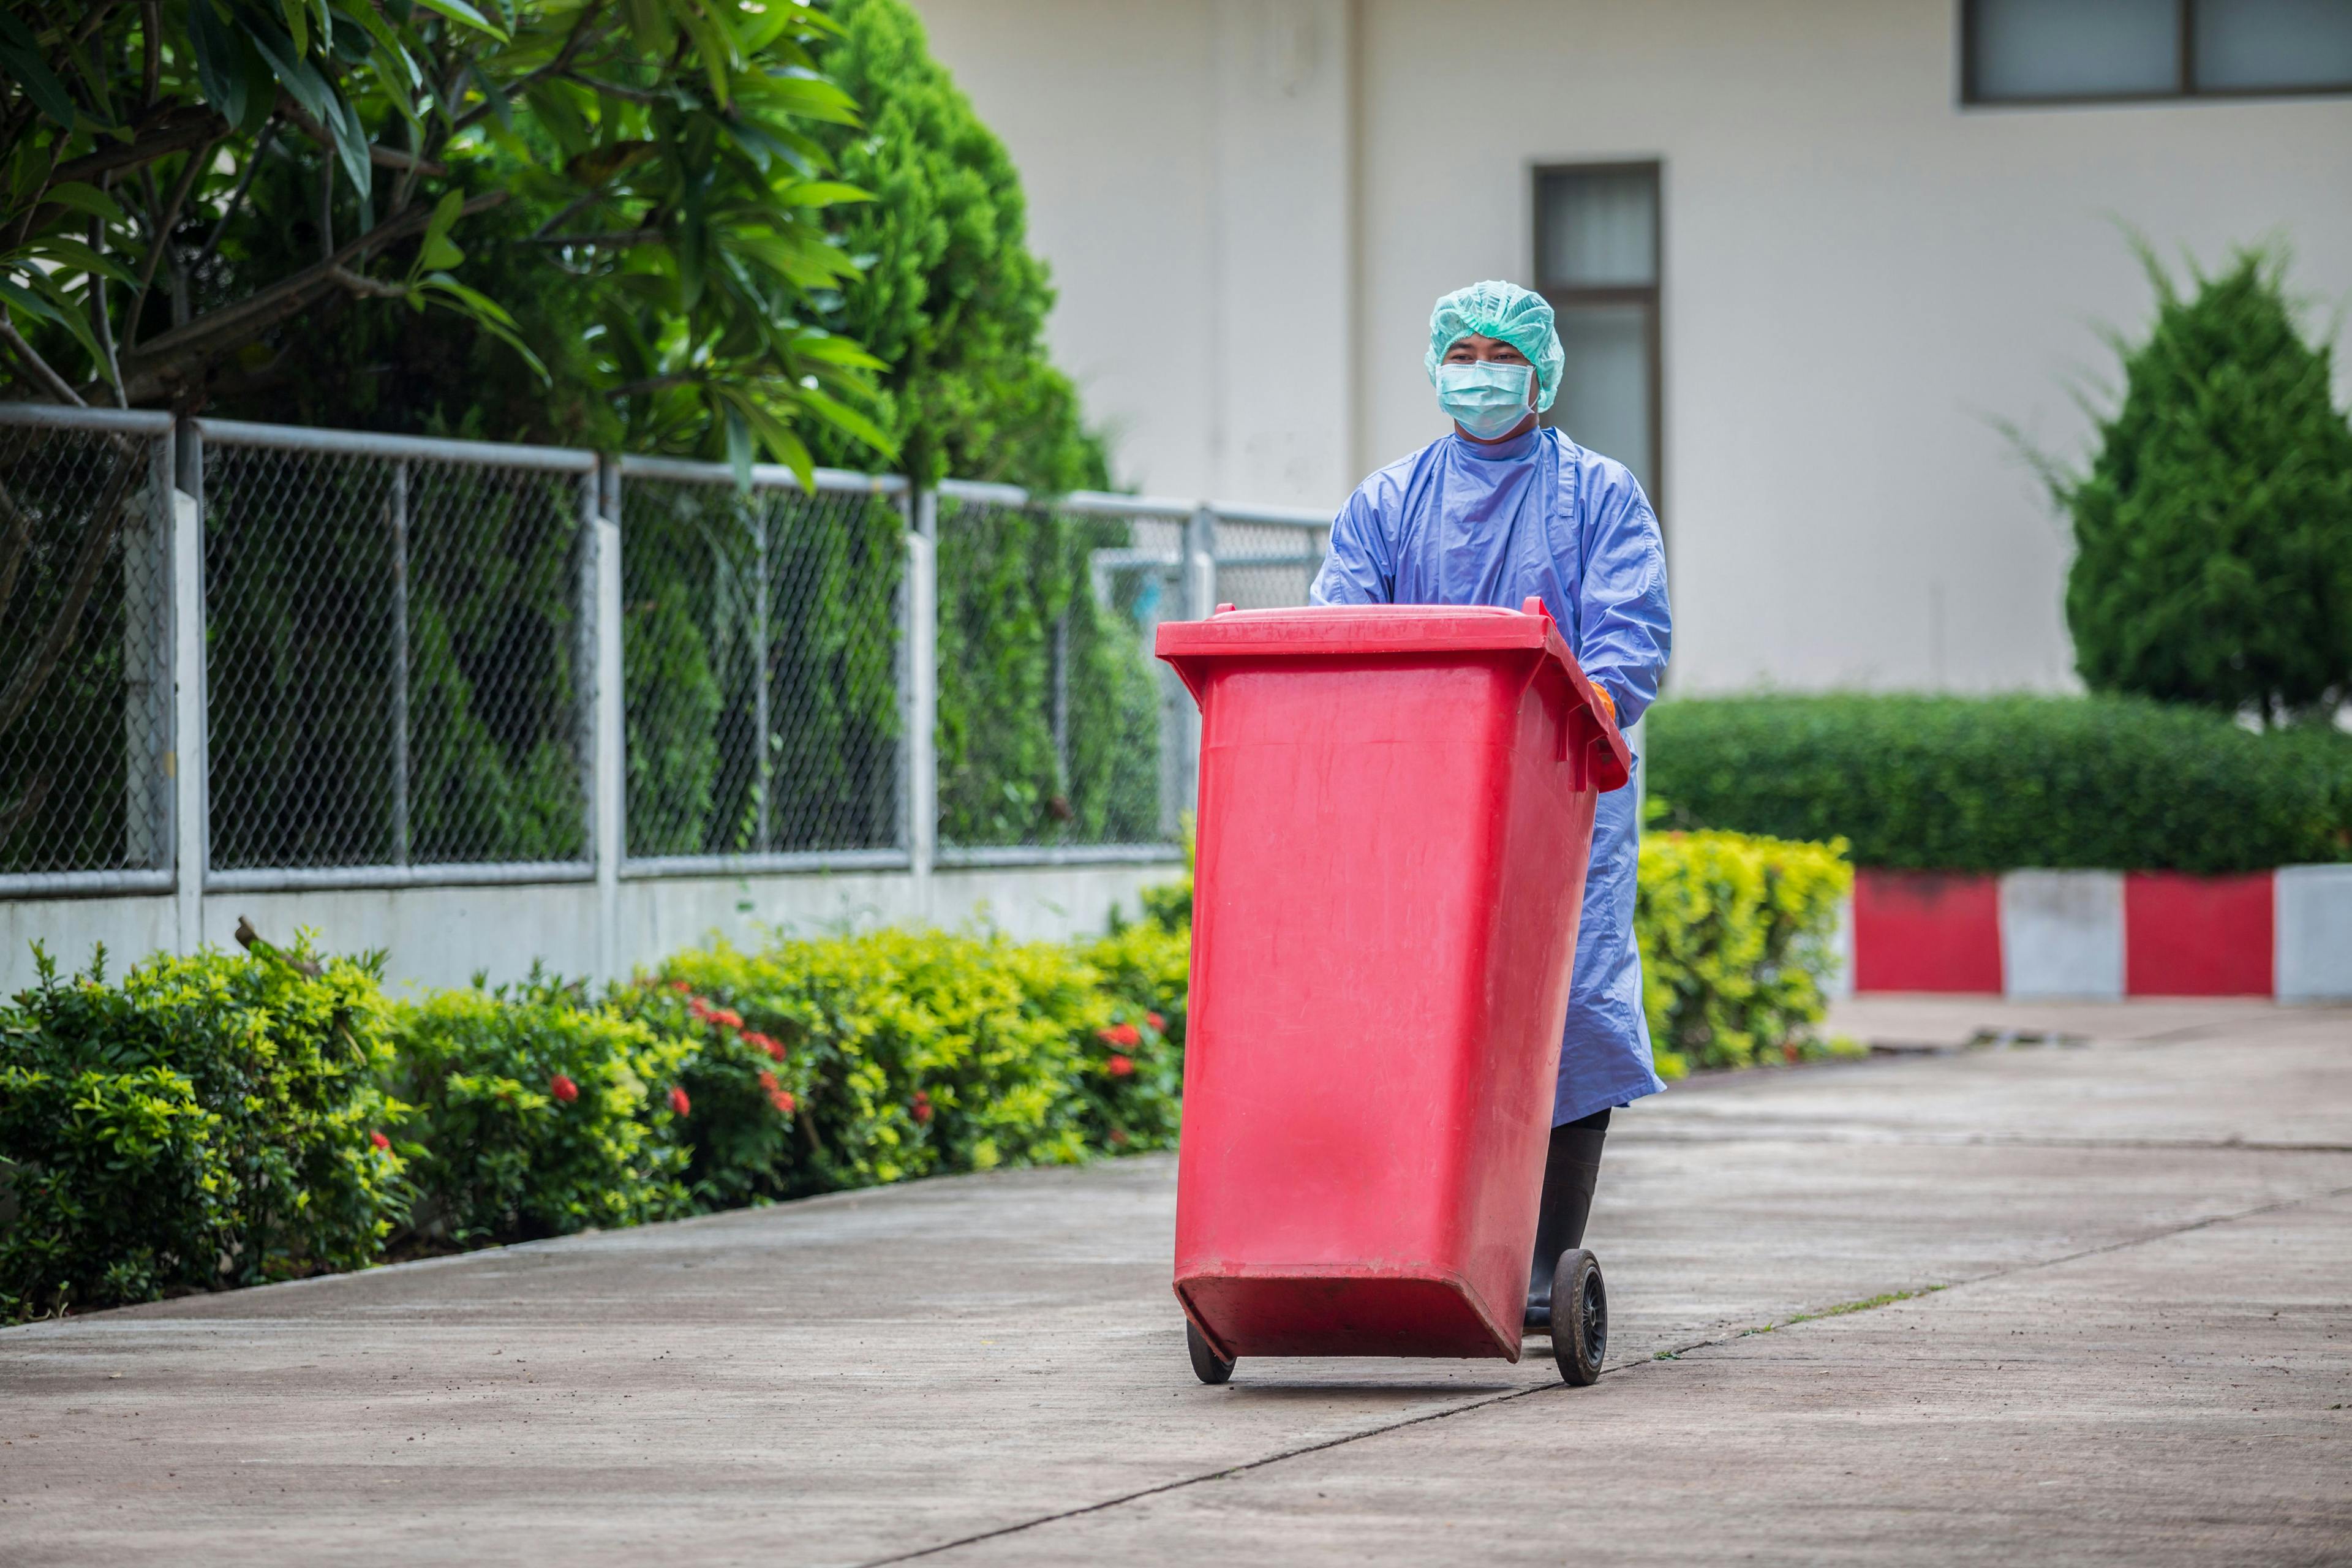 Are We Doing Enough to Manage Biomedical Waste in Our Dental Practices? Image credit: © tong2530 – stock.adobe.com